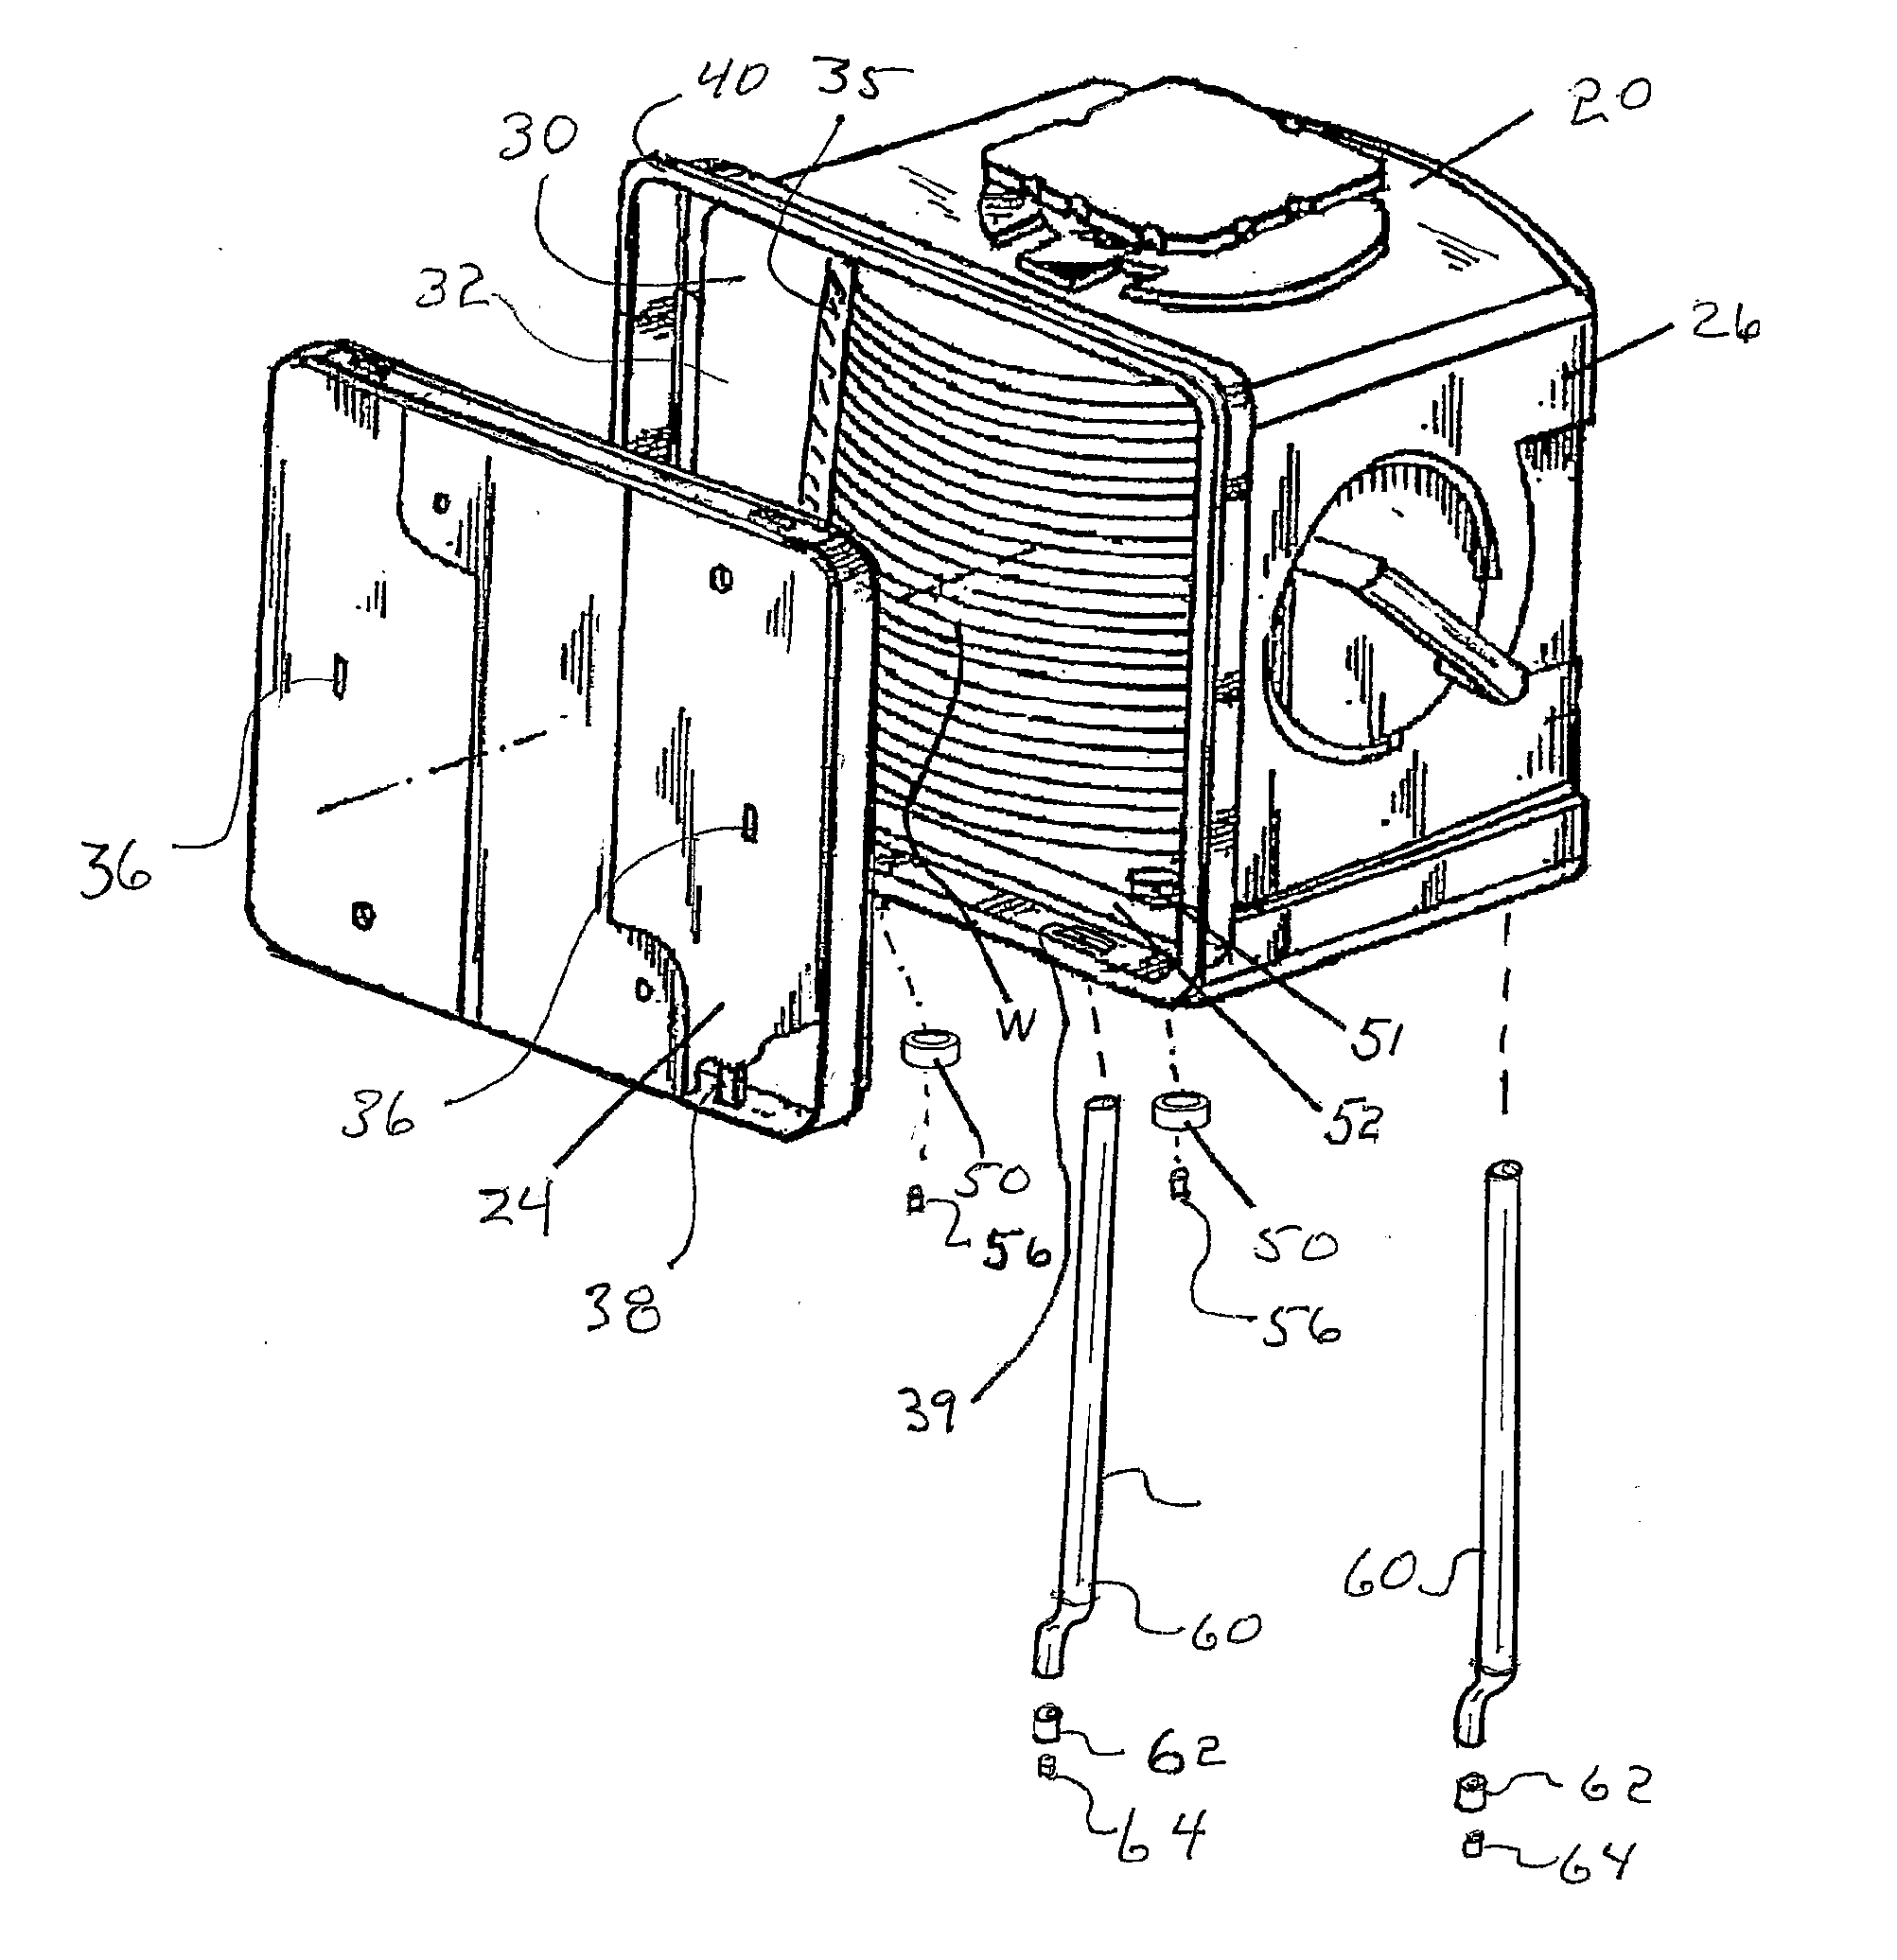 Wafer container with tubular environmental control components